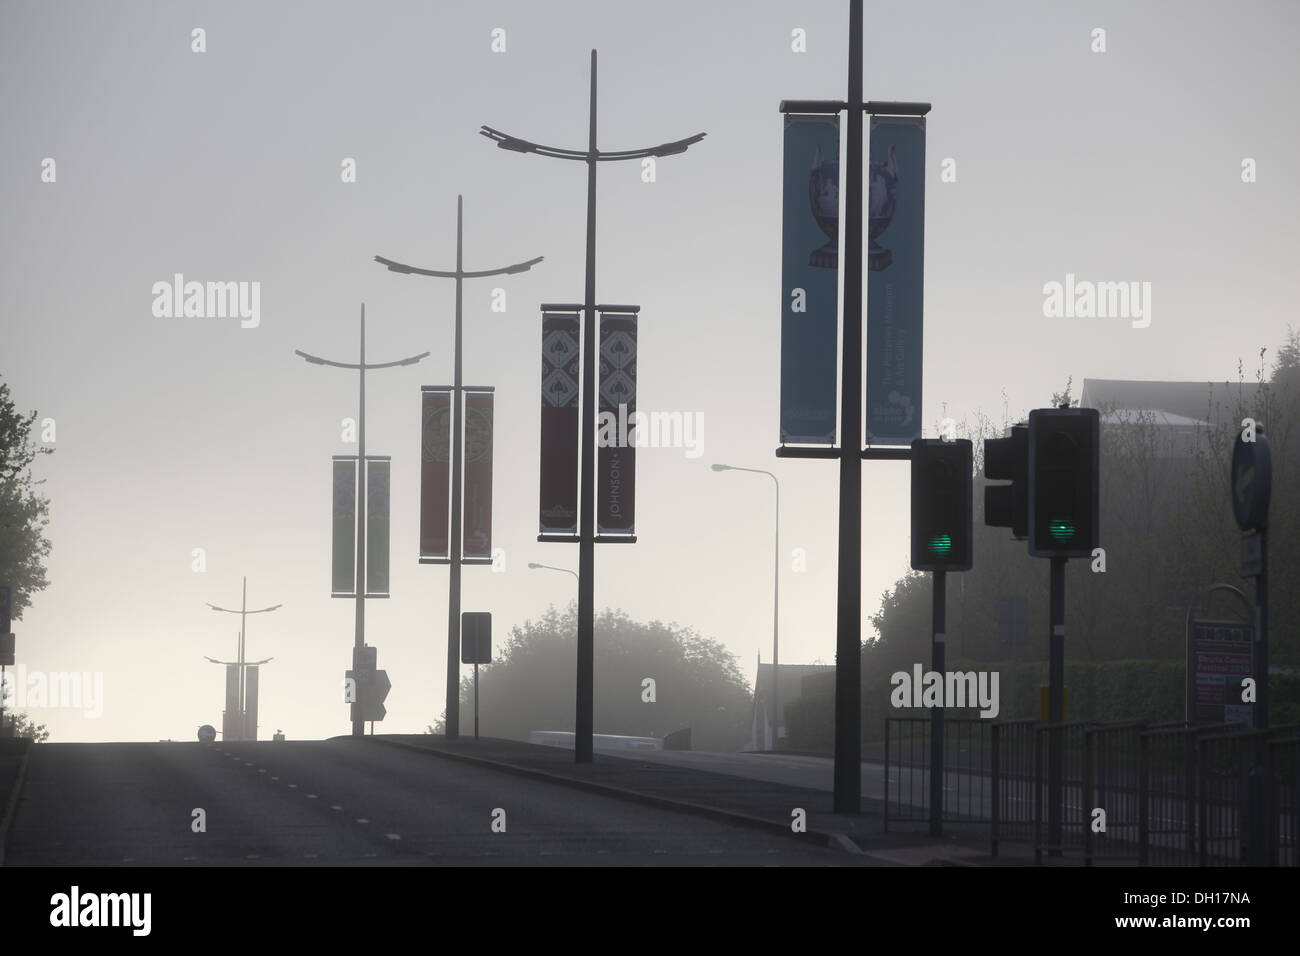 A deserted dual carriageway in Hanley Stoke on Trent - Potteries Way, decorated with banners, all quiet in the morning mist Stock Photo